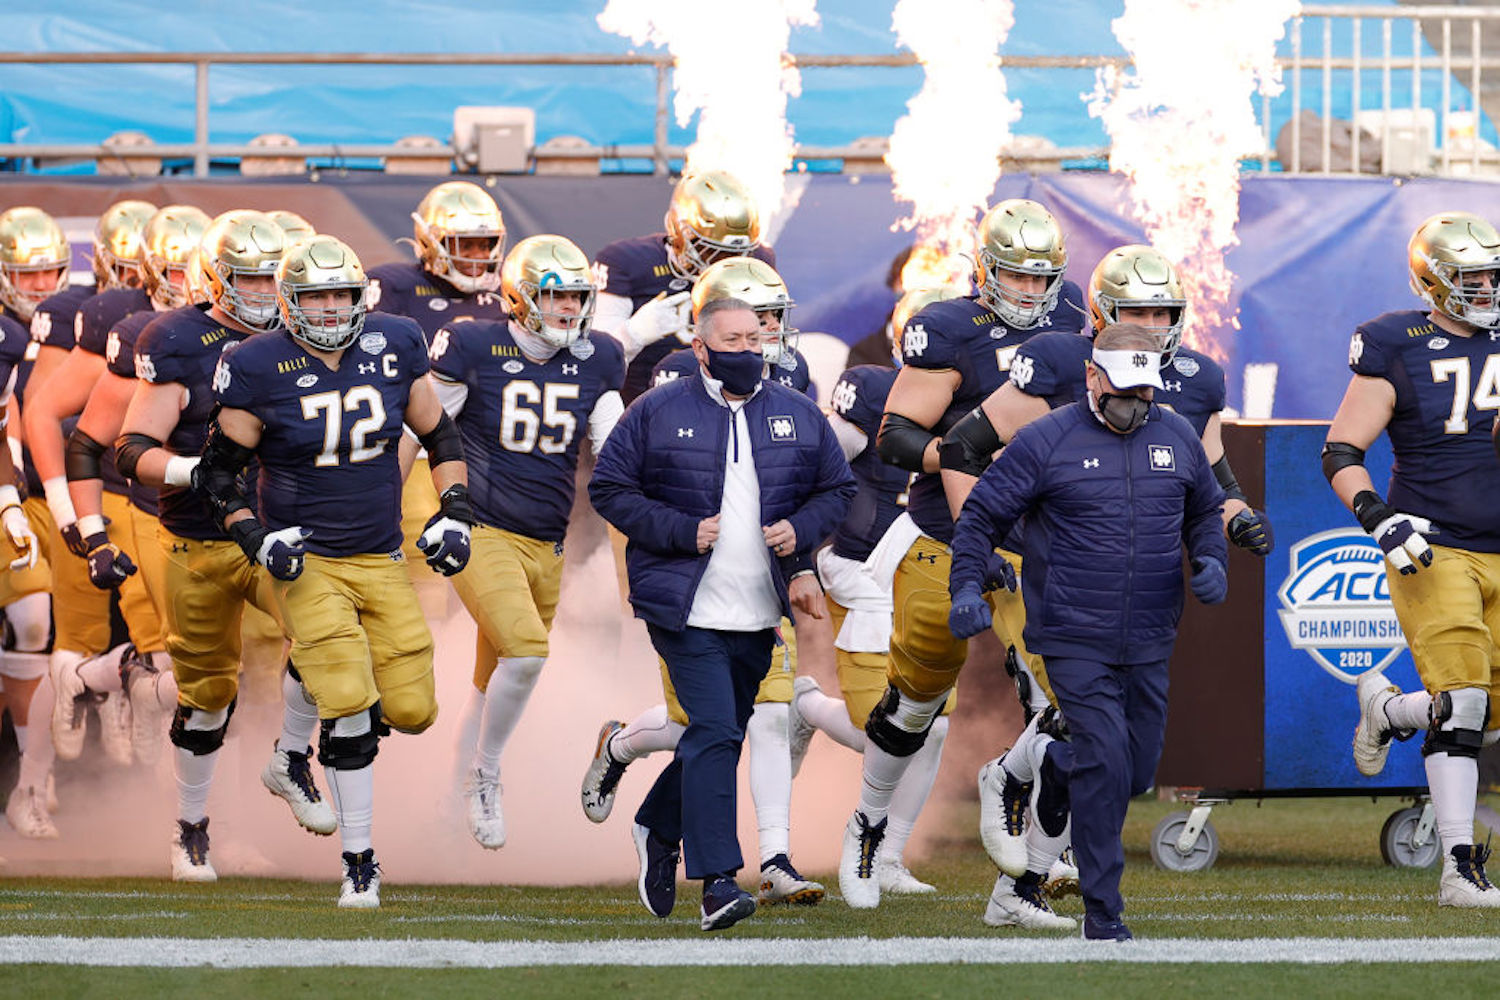 Why Did Notre Dame Get Into the College Football Playoff Over Texas A&M?